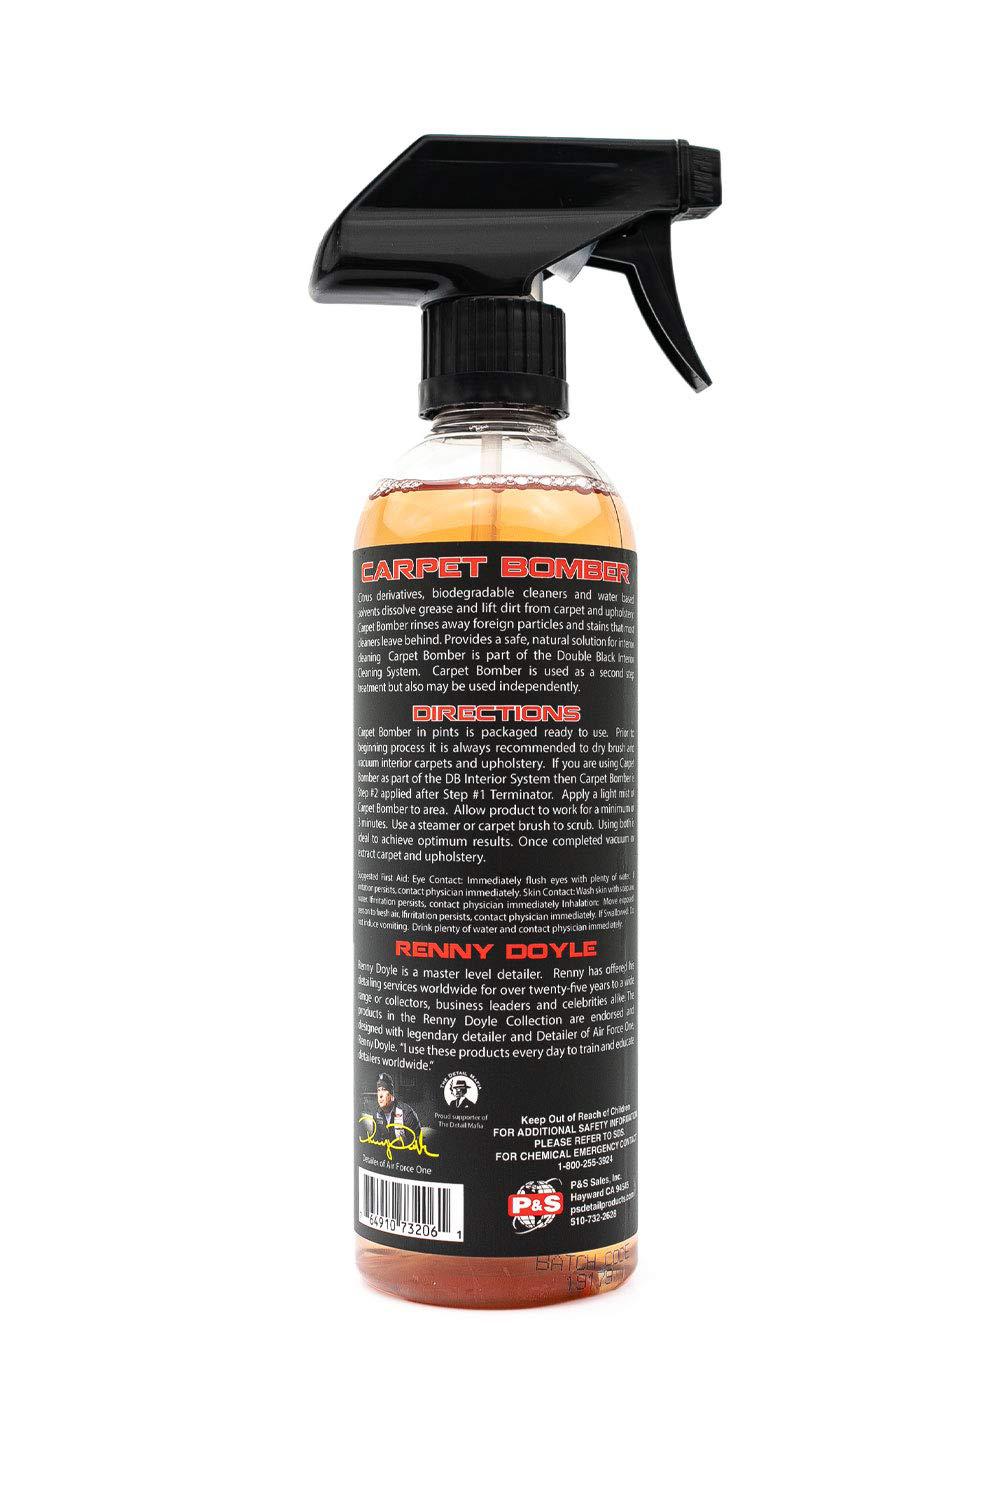 P & S PROFESSIONAL DETAIL PRODUCTS p&s professional detail products - carpet bomber - carpet and upholstery cleaner; citrus based cleaner, dissolves grease, lif